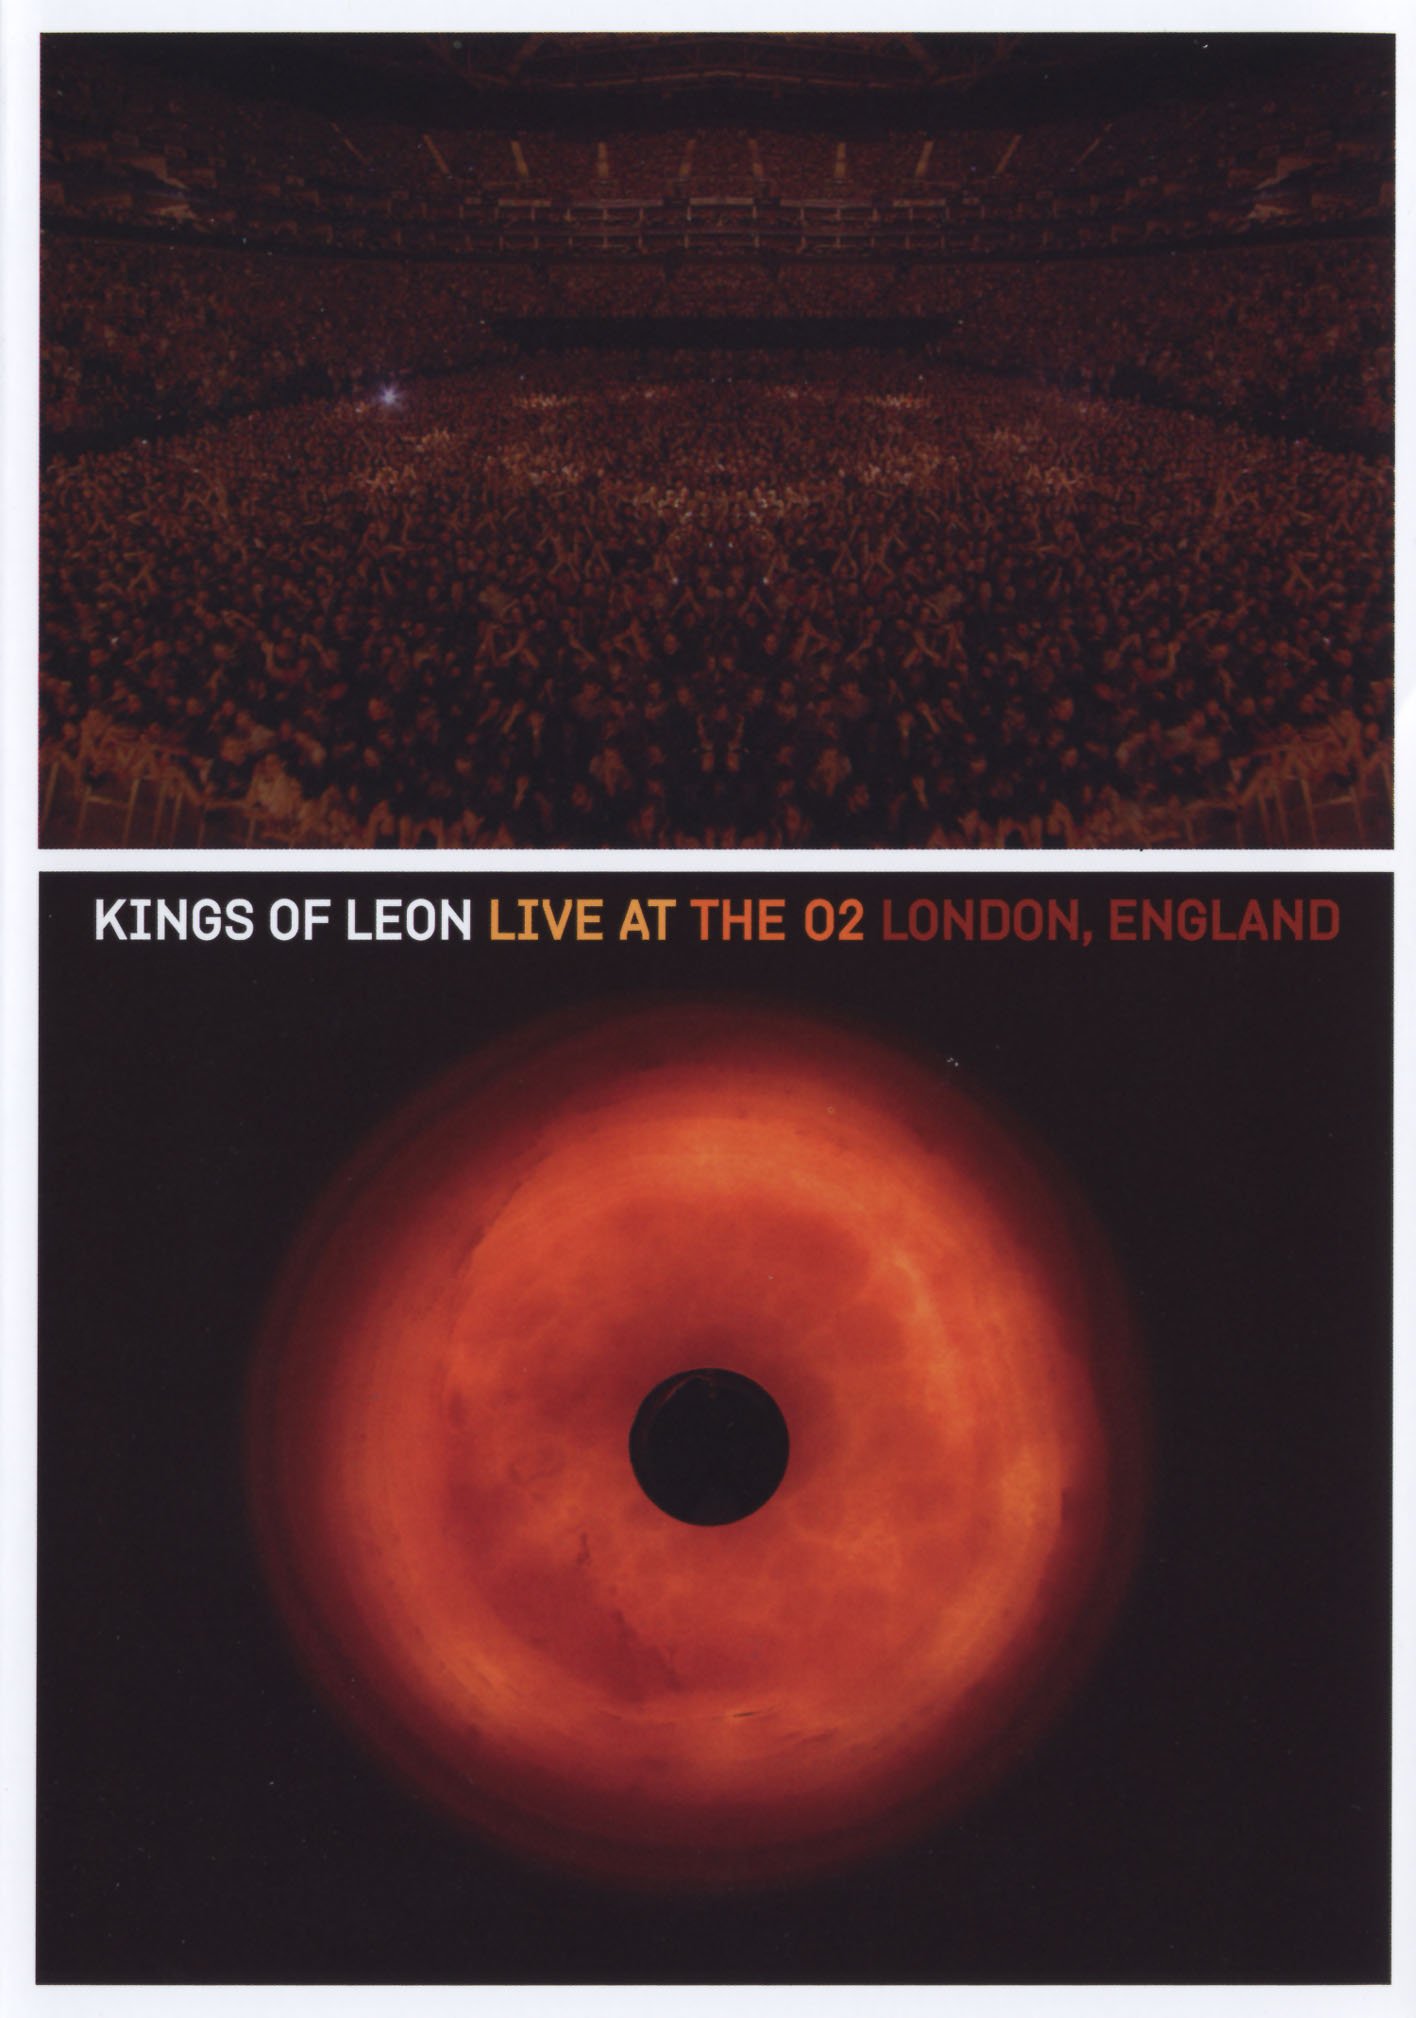 Live At The 02 London, England